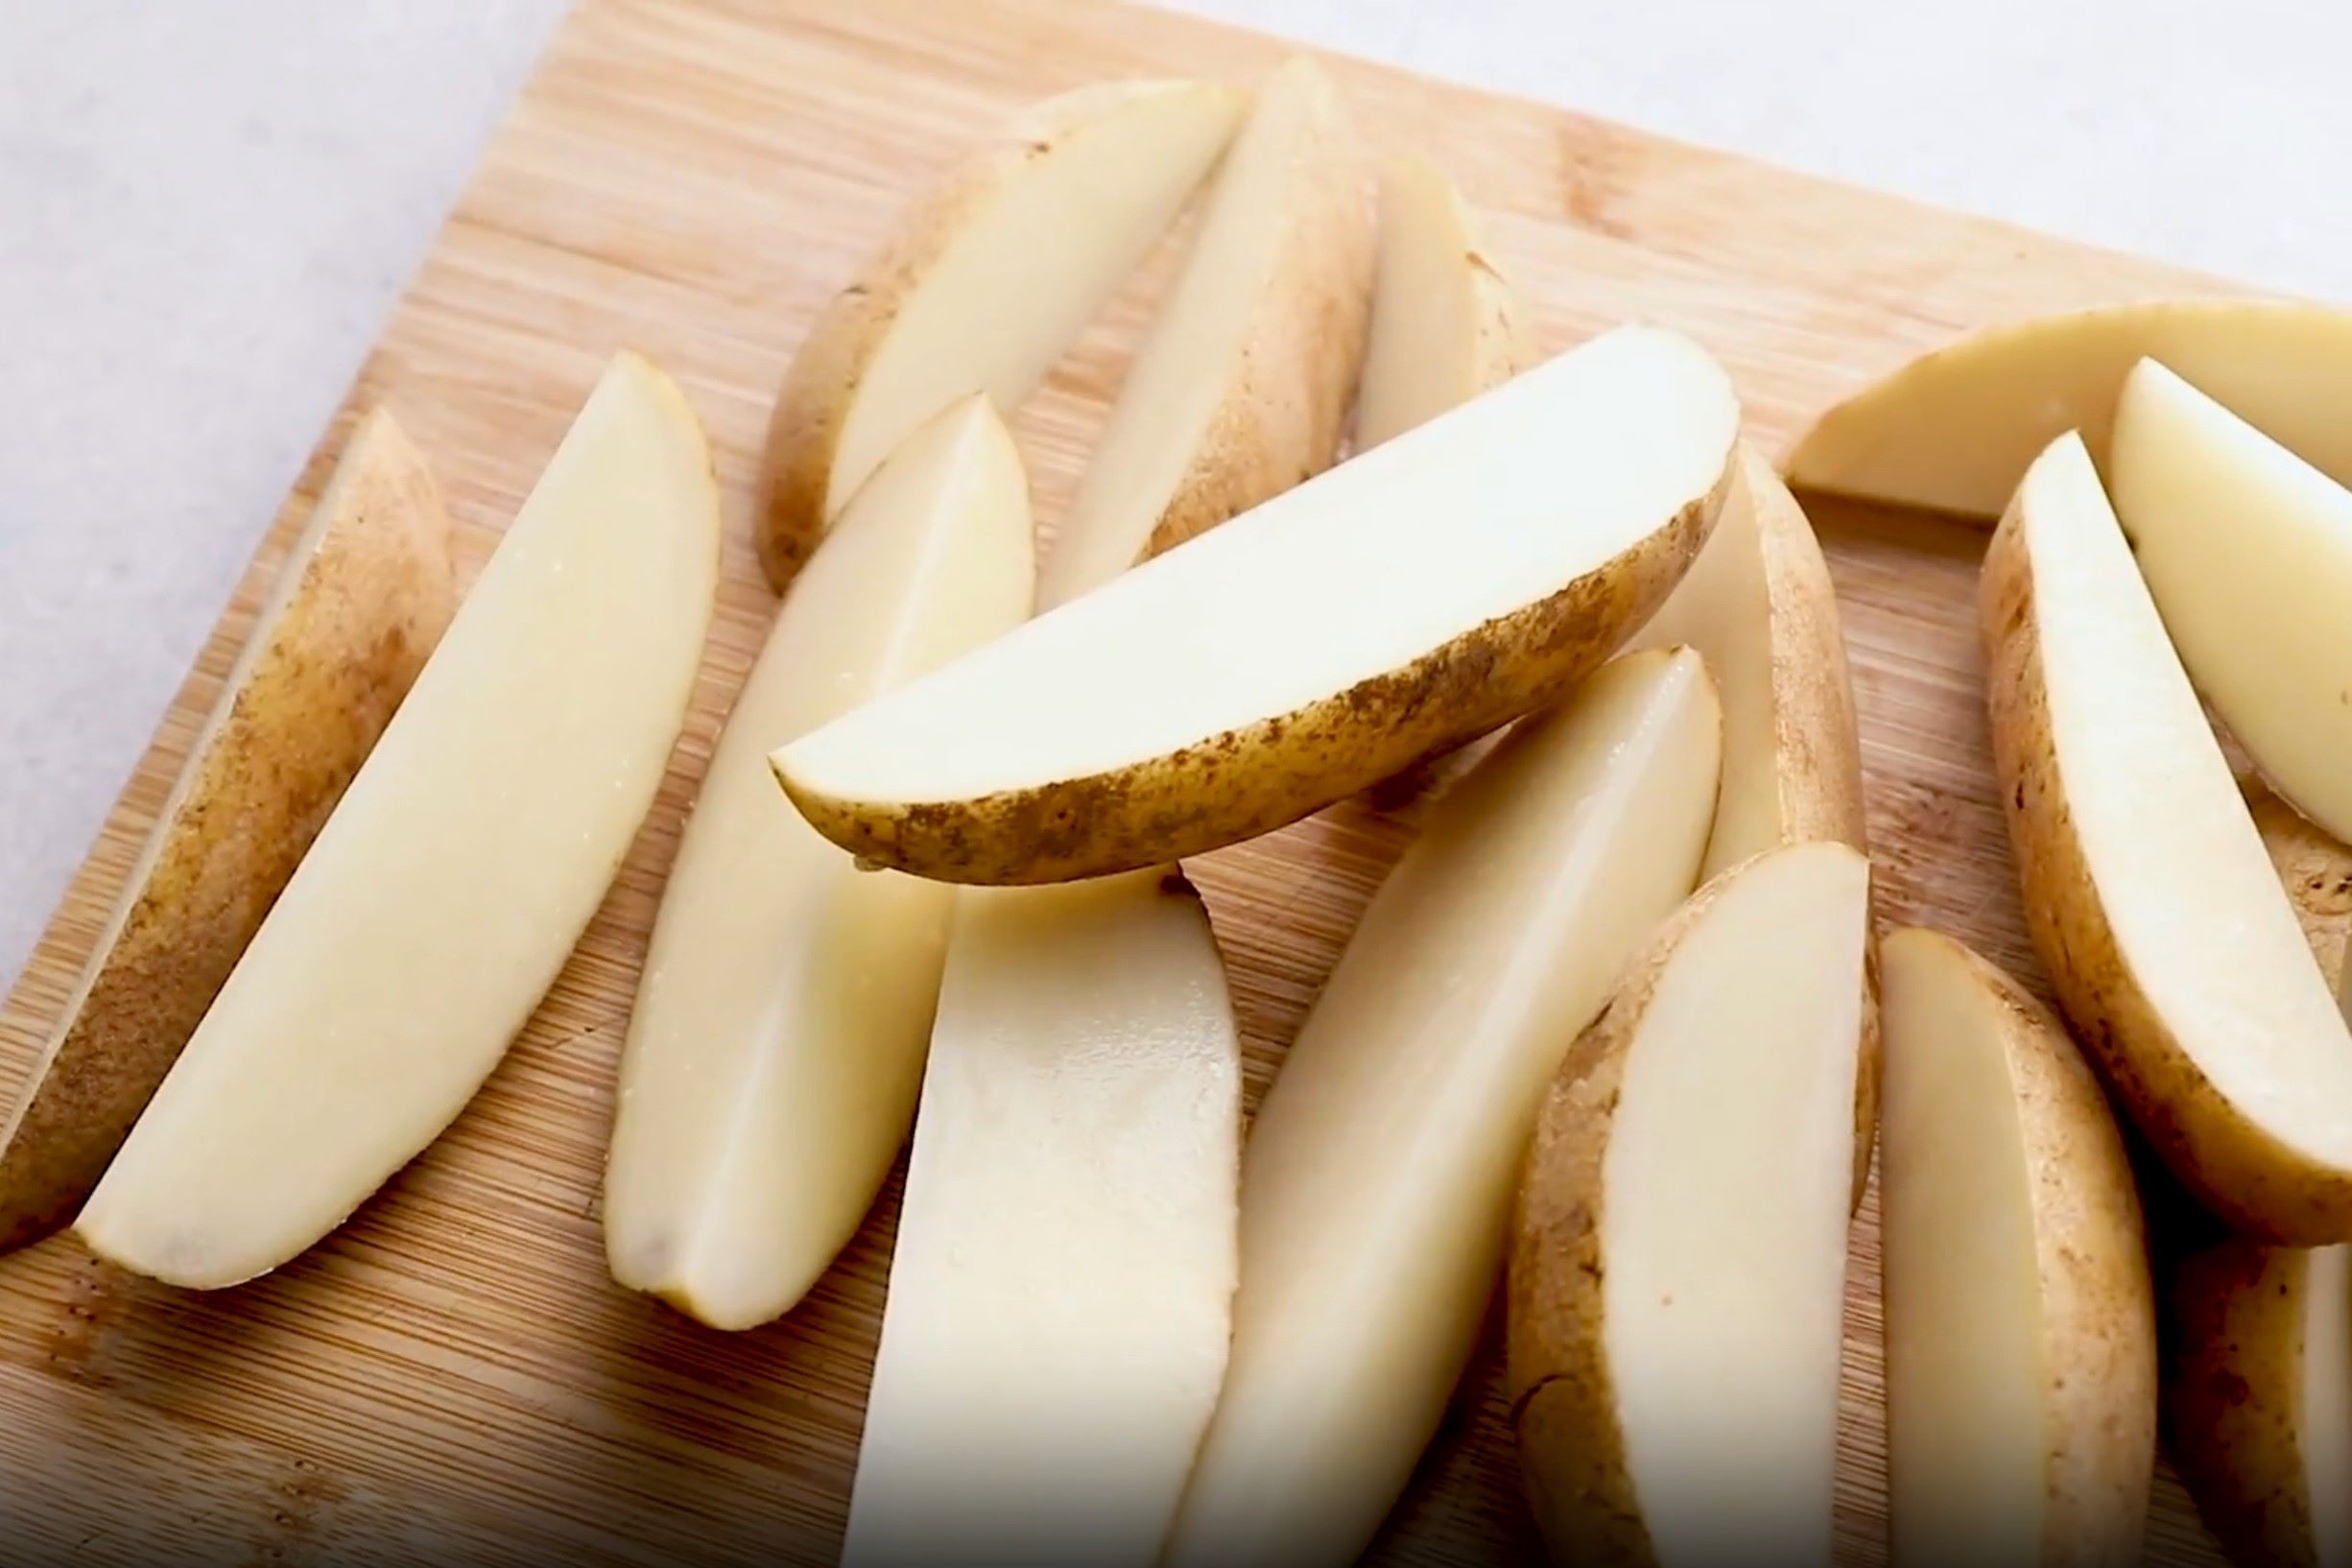 How To Cut Potatoes Into Wedges